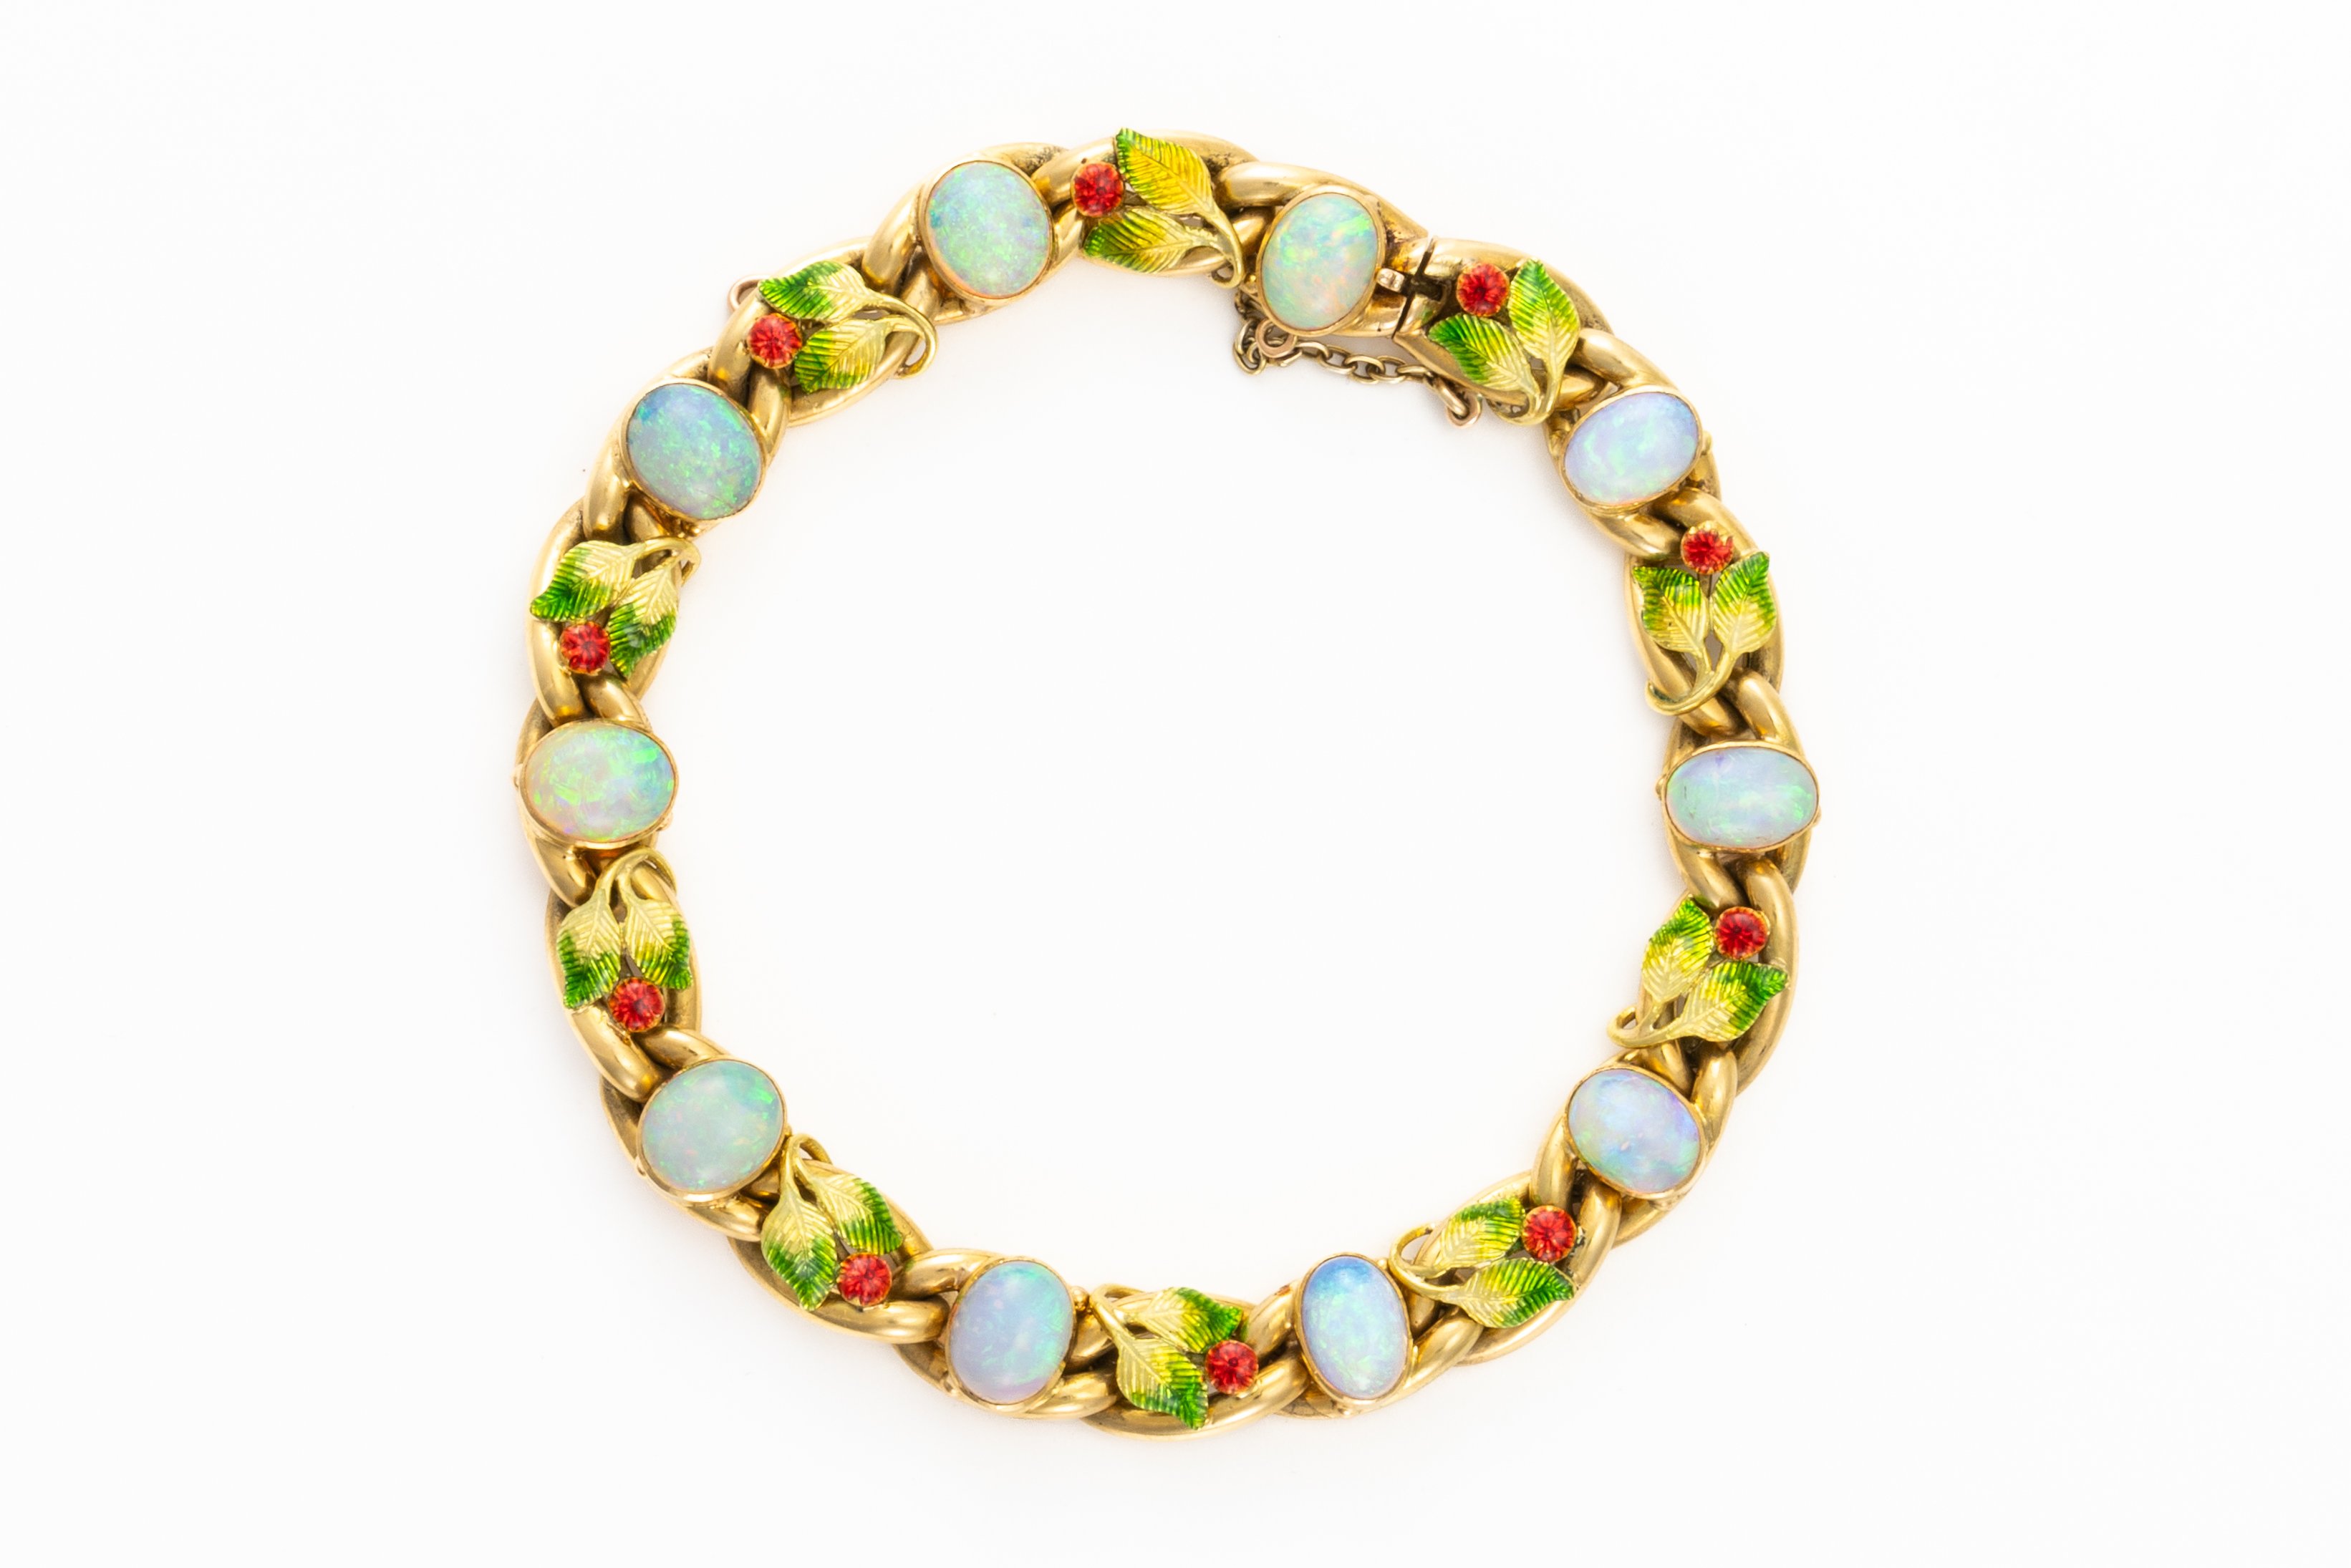 ATTRIBUTED TO MRS NEWMAN: A GOLD, OPAL AND ENAMEL BRACELET